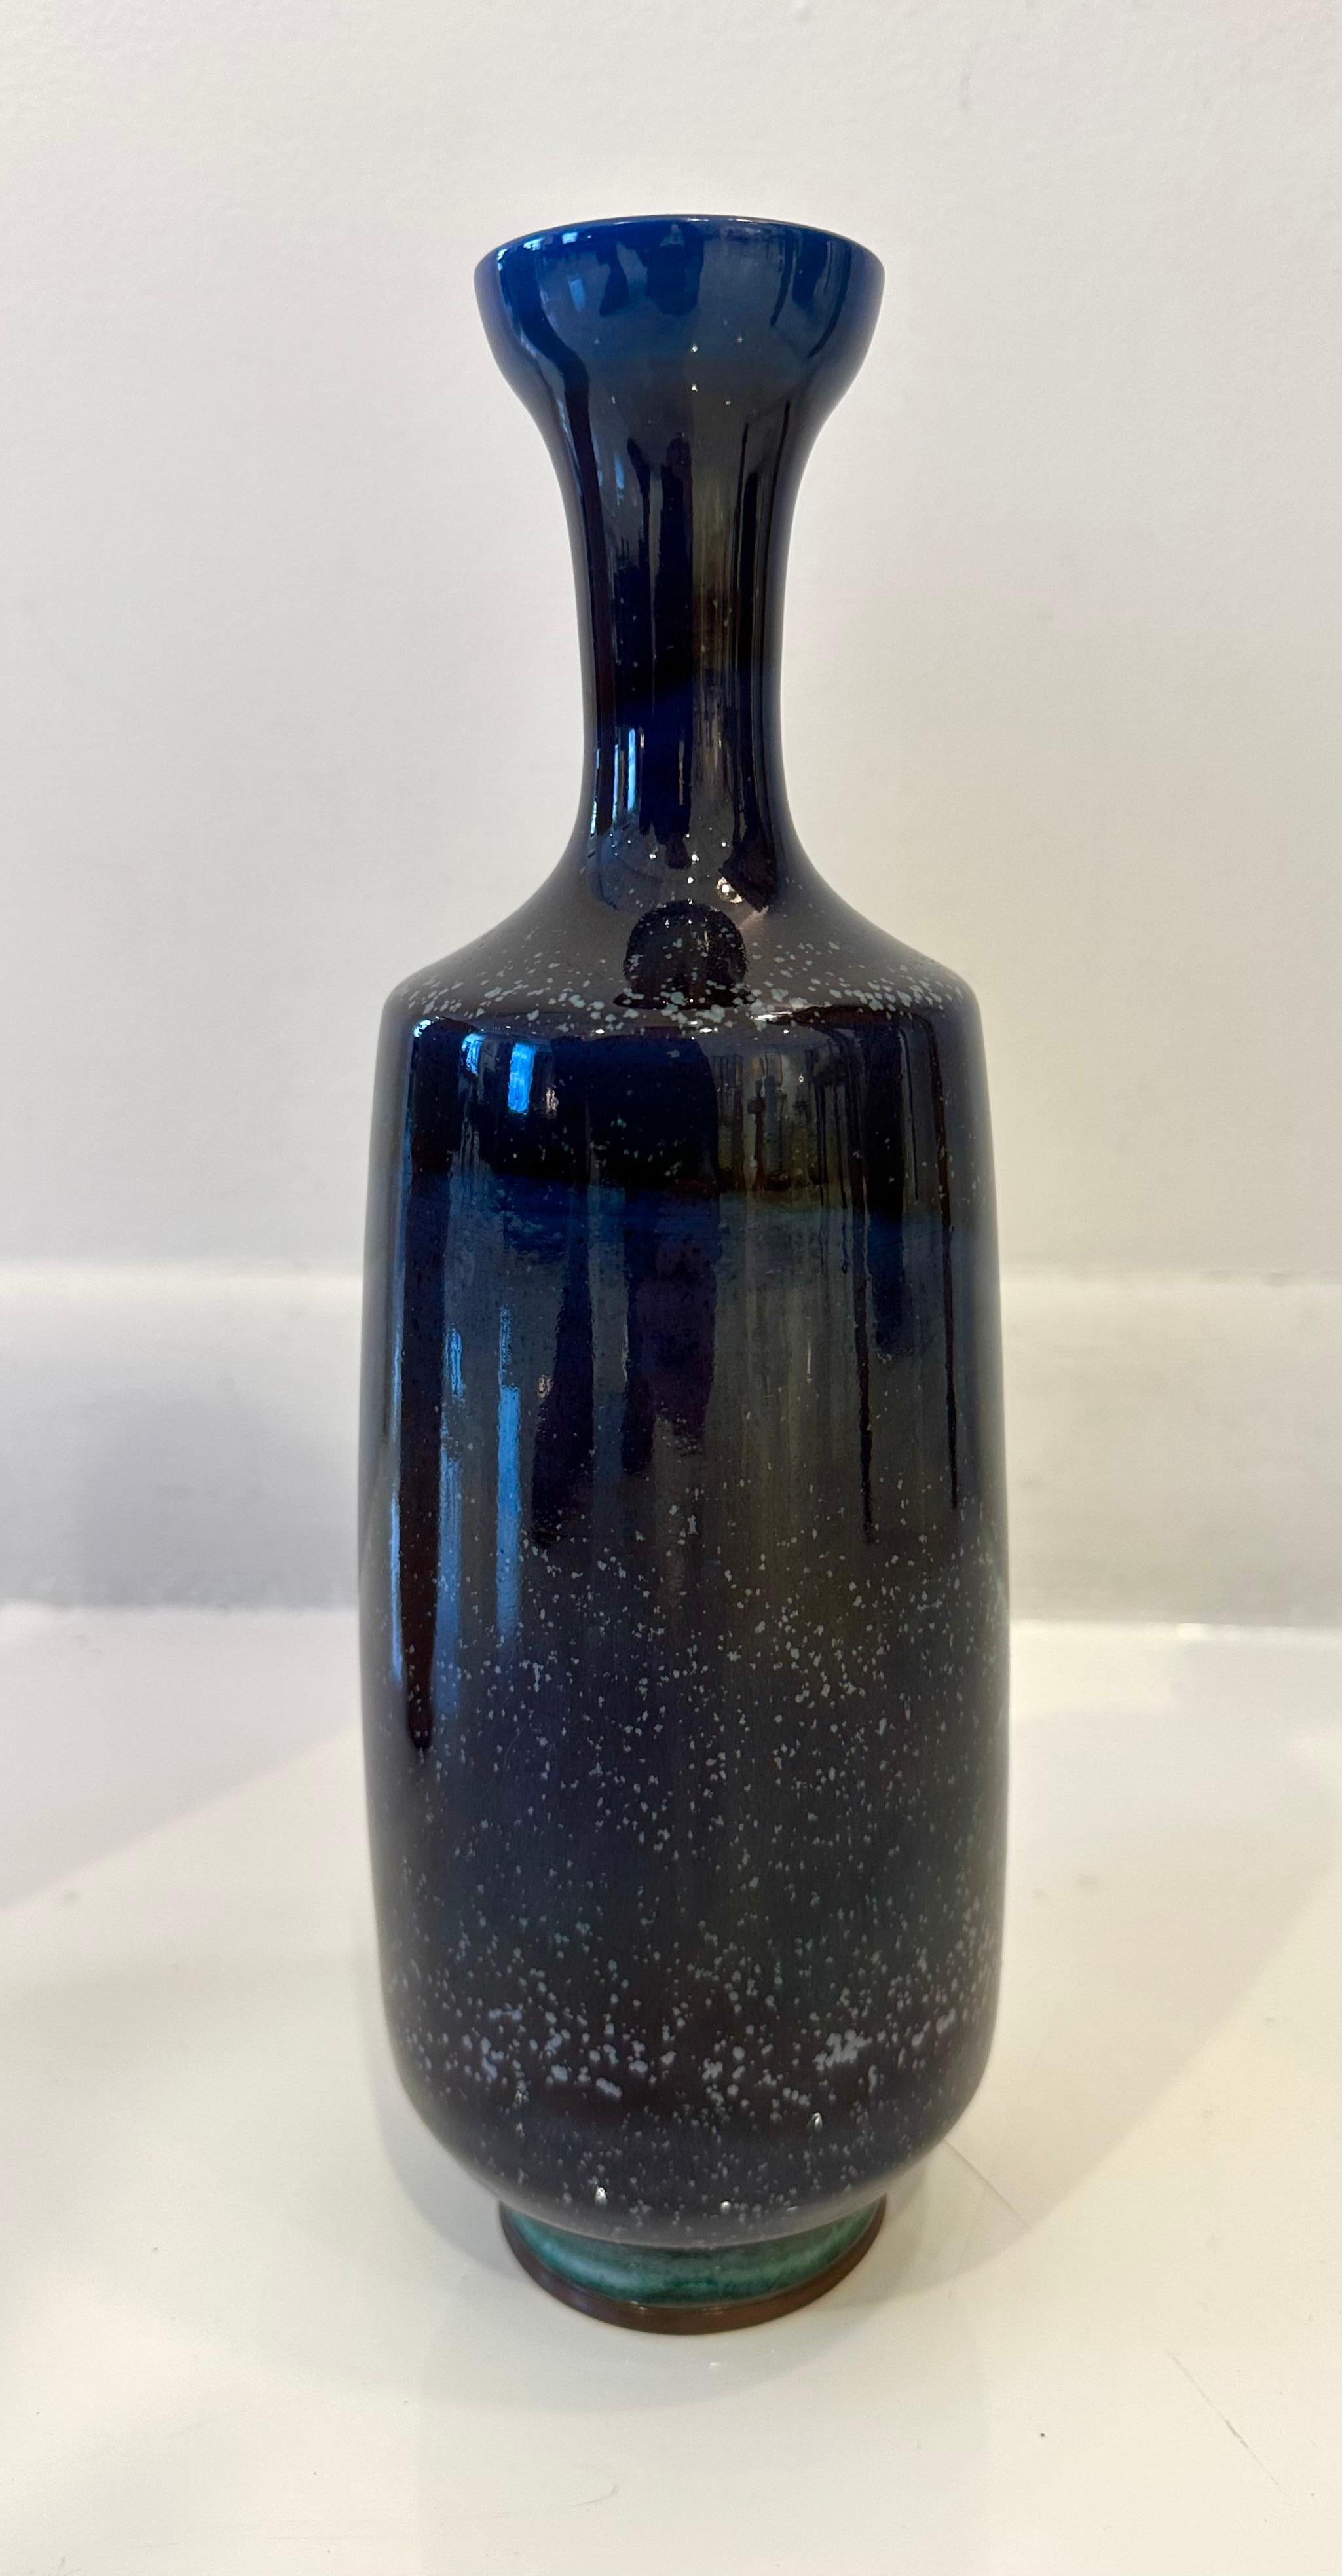 Unique hand-thrown and glazed blue bottle vase. Letter dated 1963, with incised Gustavsberg Studio hand and signed 